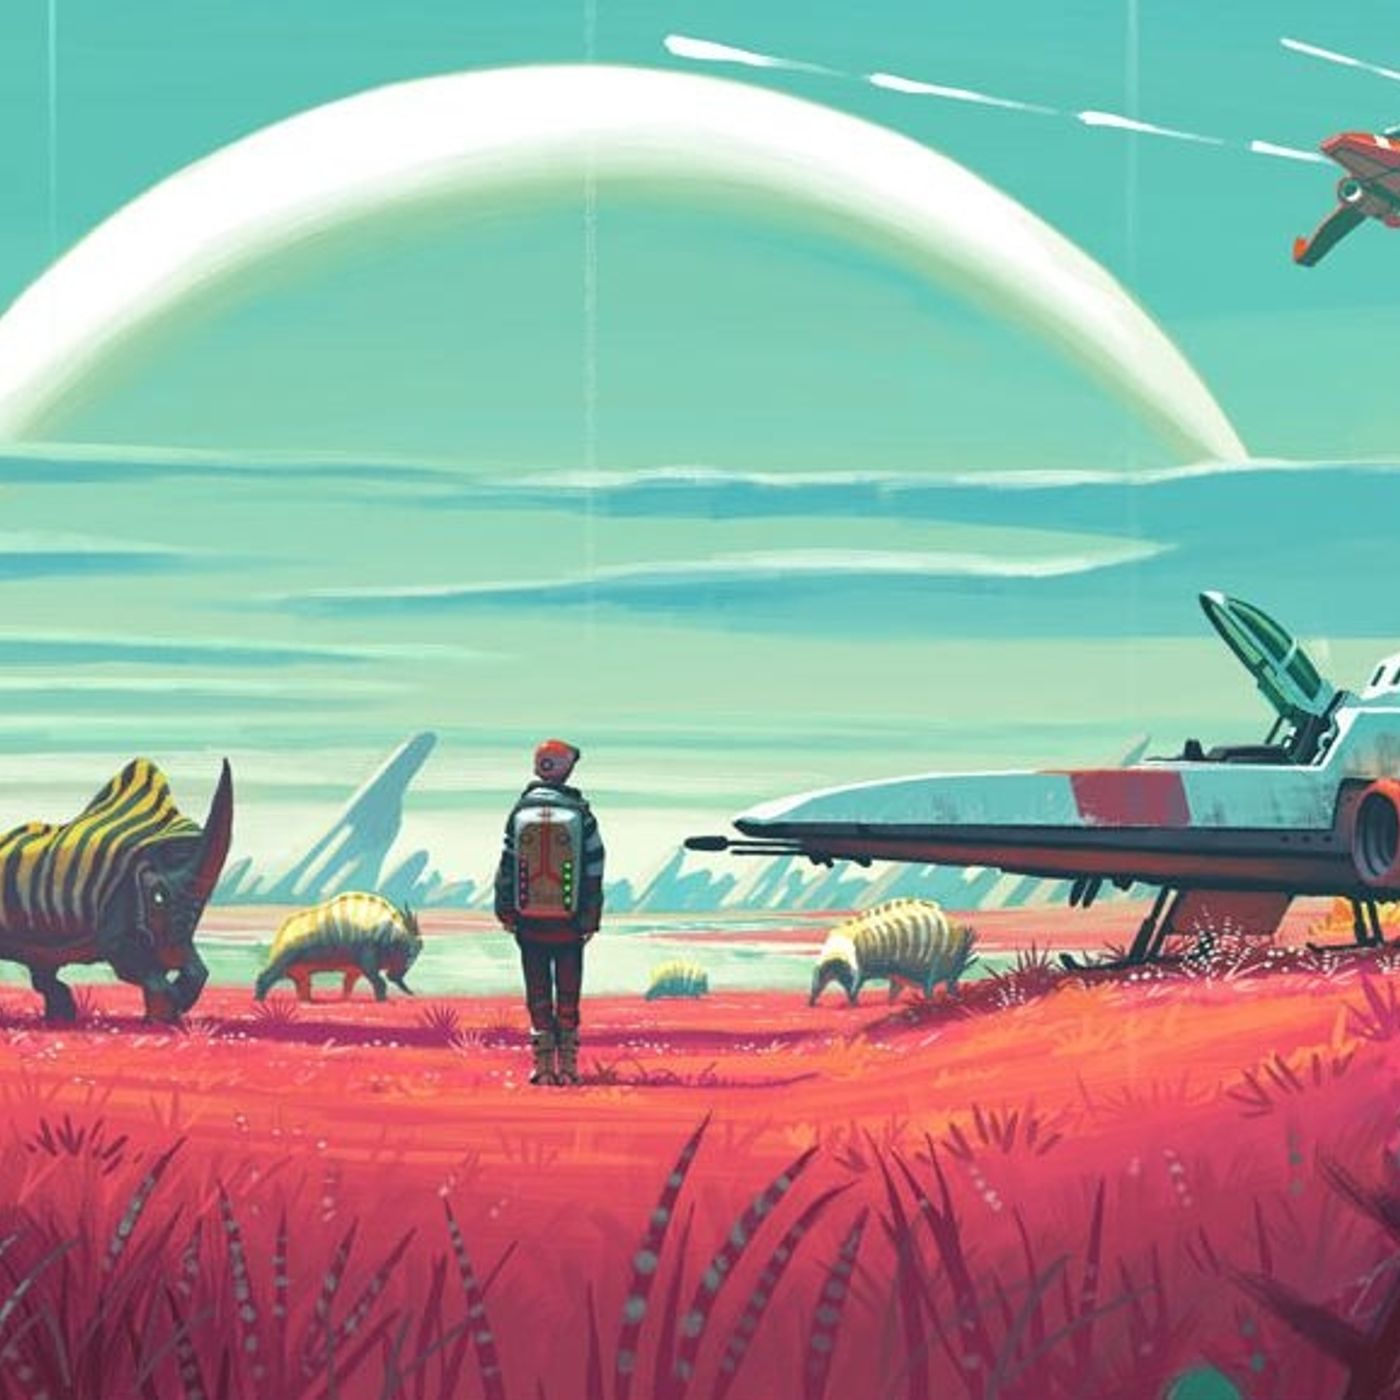 MINIGAME: Making Your Own Lore in ‘No Man’s Sky’